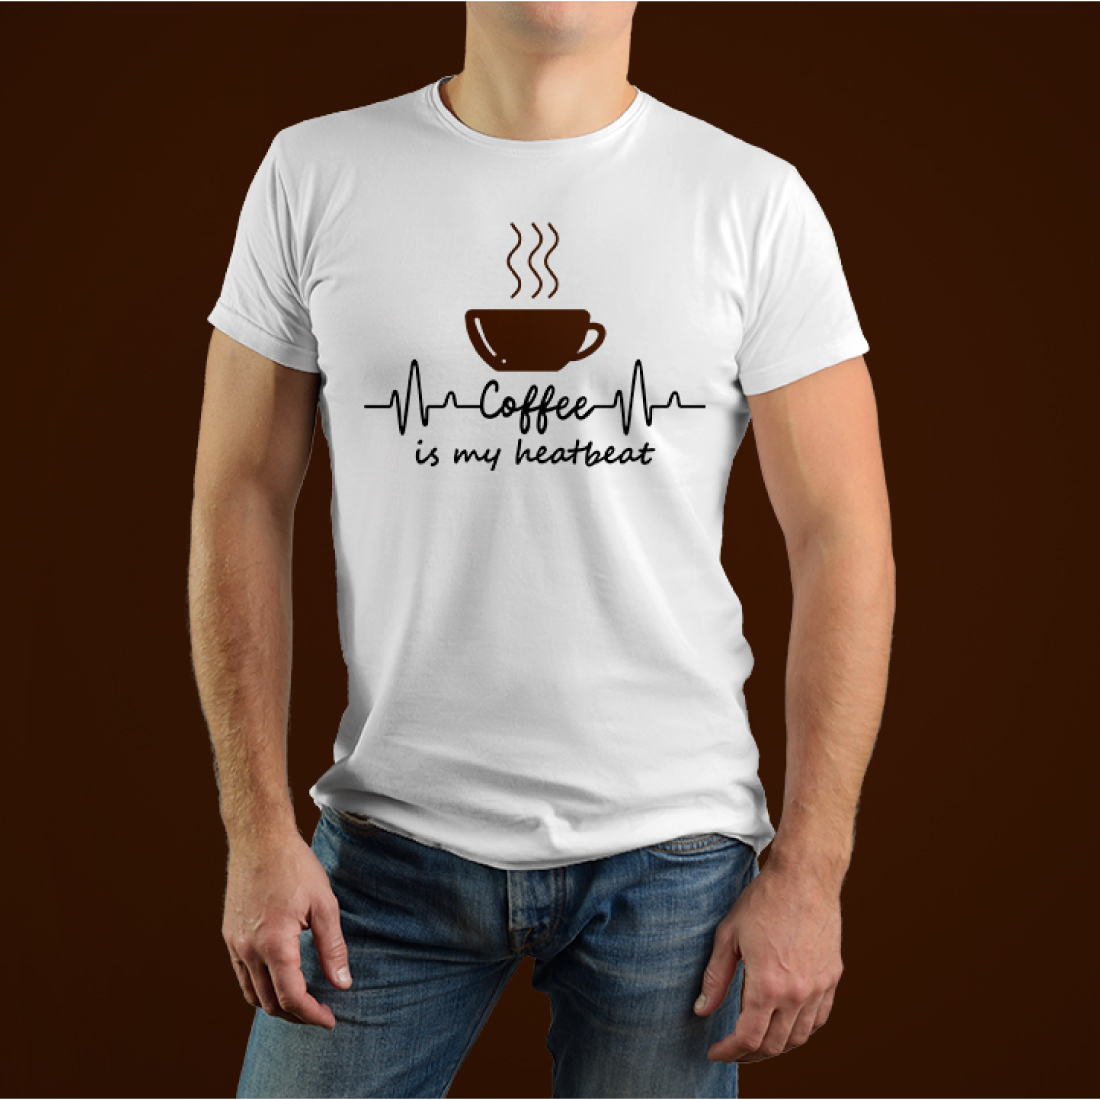 Coffee is my heartbeat t shirt design cover image.